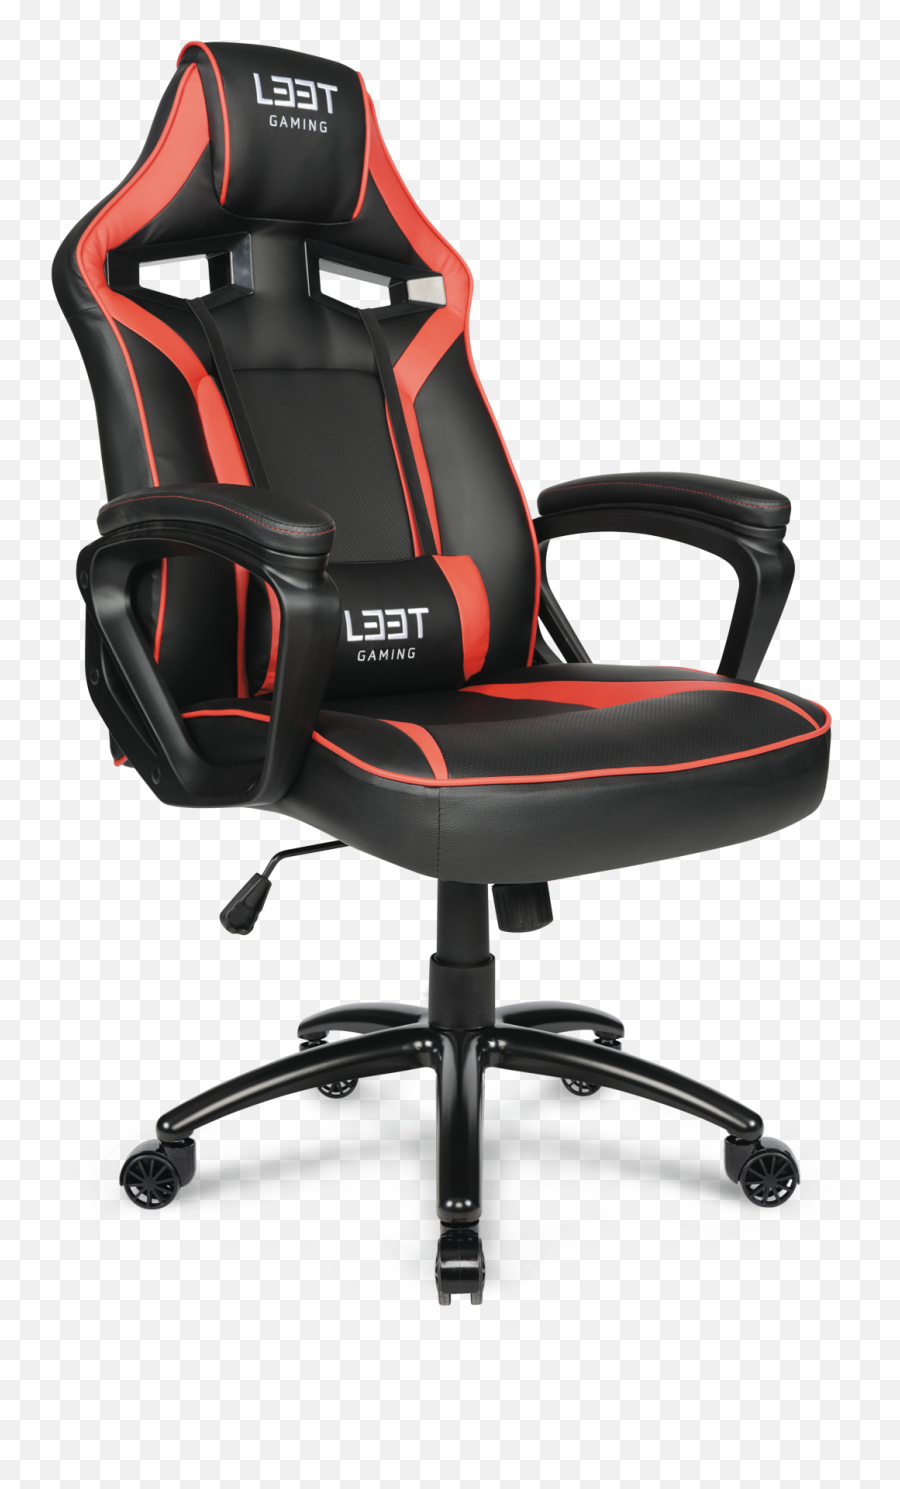 Extreme Gaming Chair - Red L33tgamingcom L33t Gaming Extreme Png,Gaming Chair Png